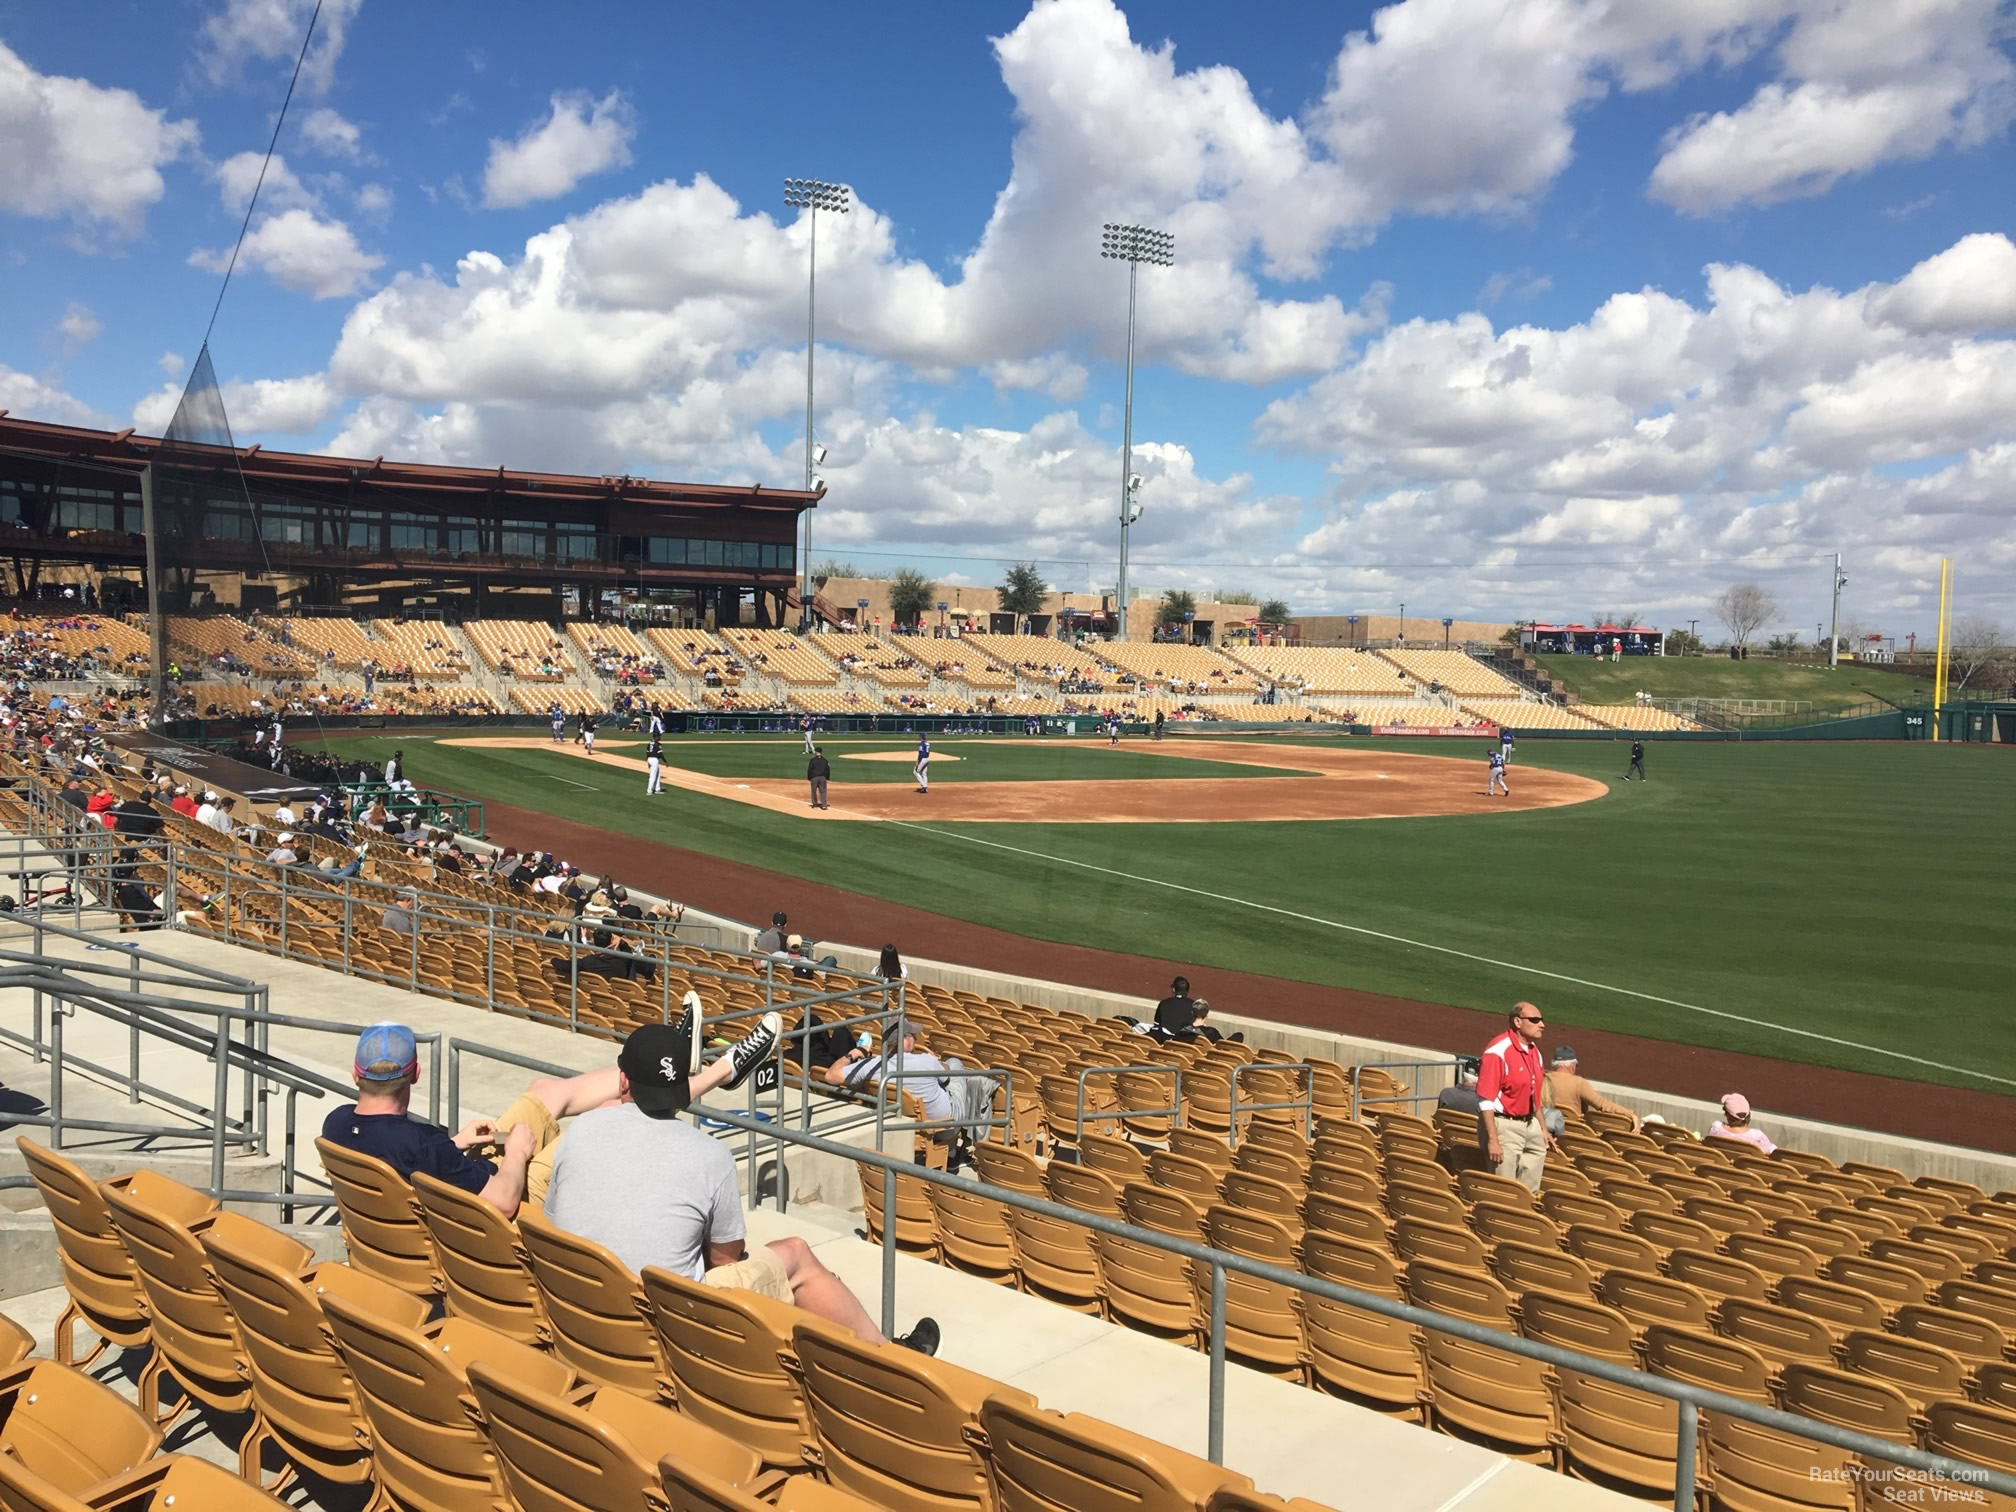 section 102, row 5 seat view  - camelback ranch